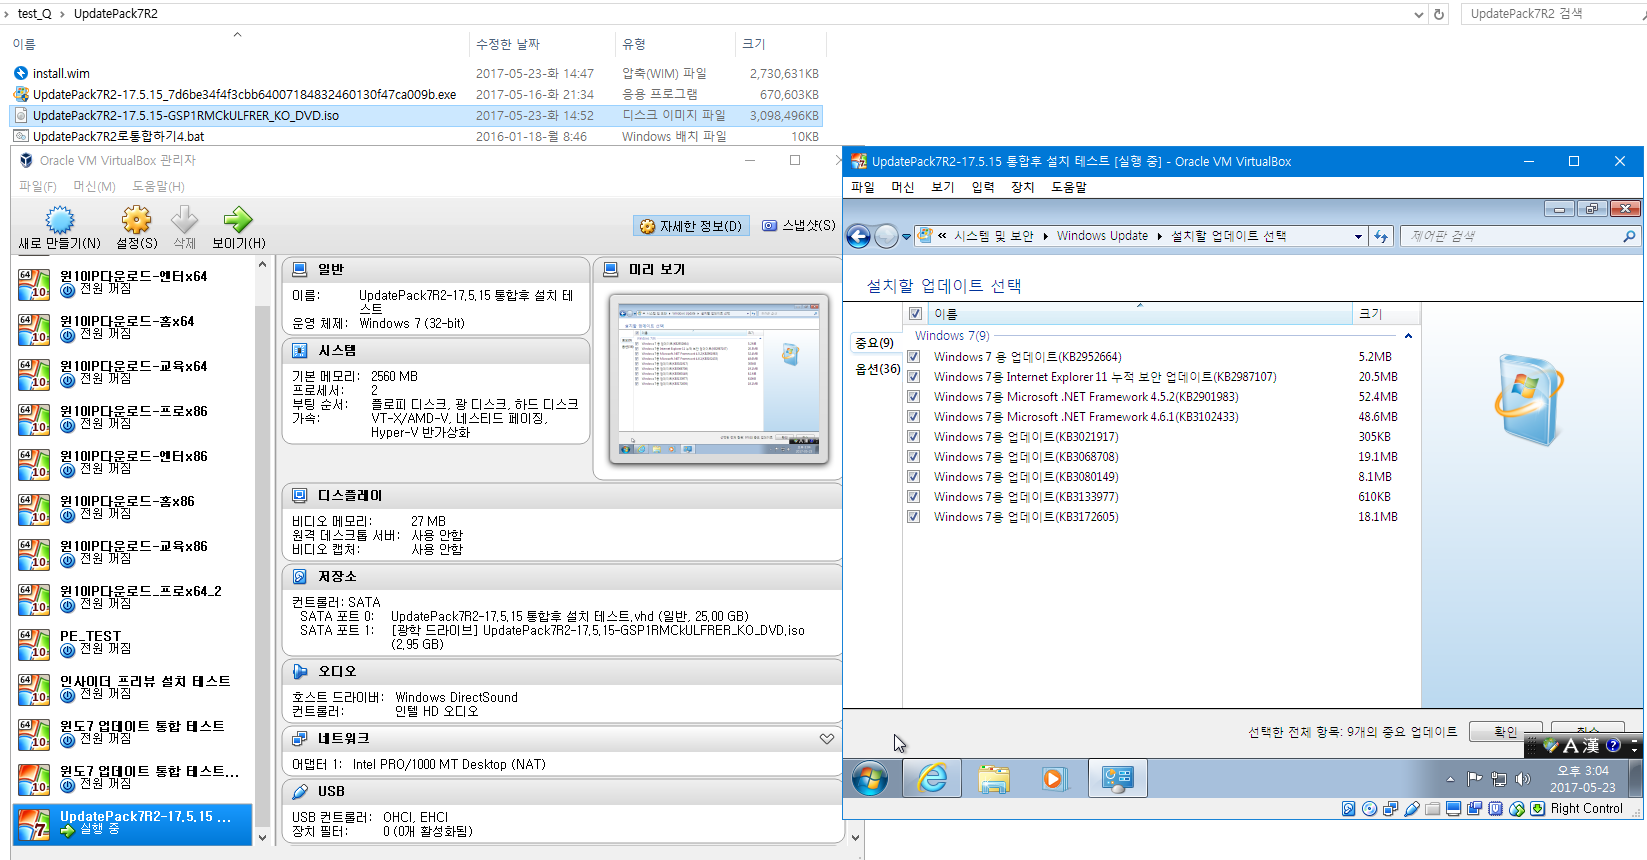 UpdatePack7R2 23.6.14 download the new version